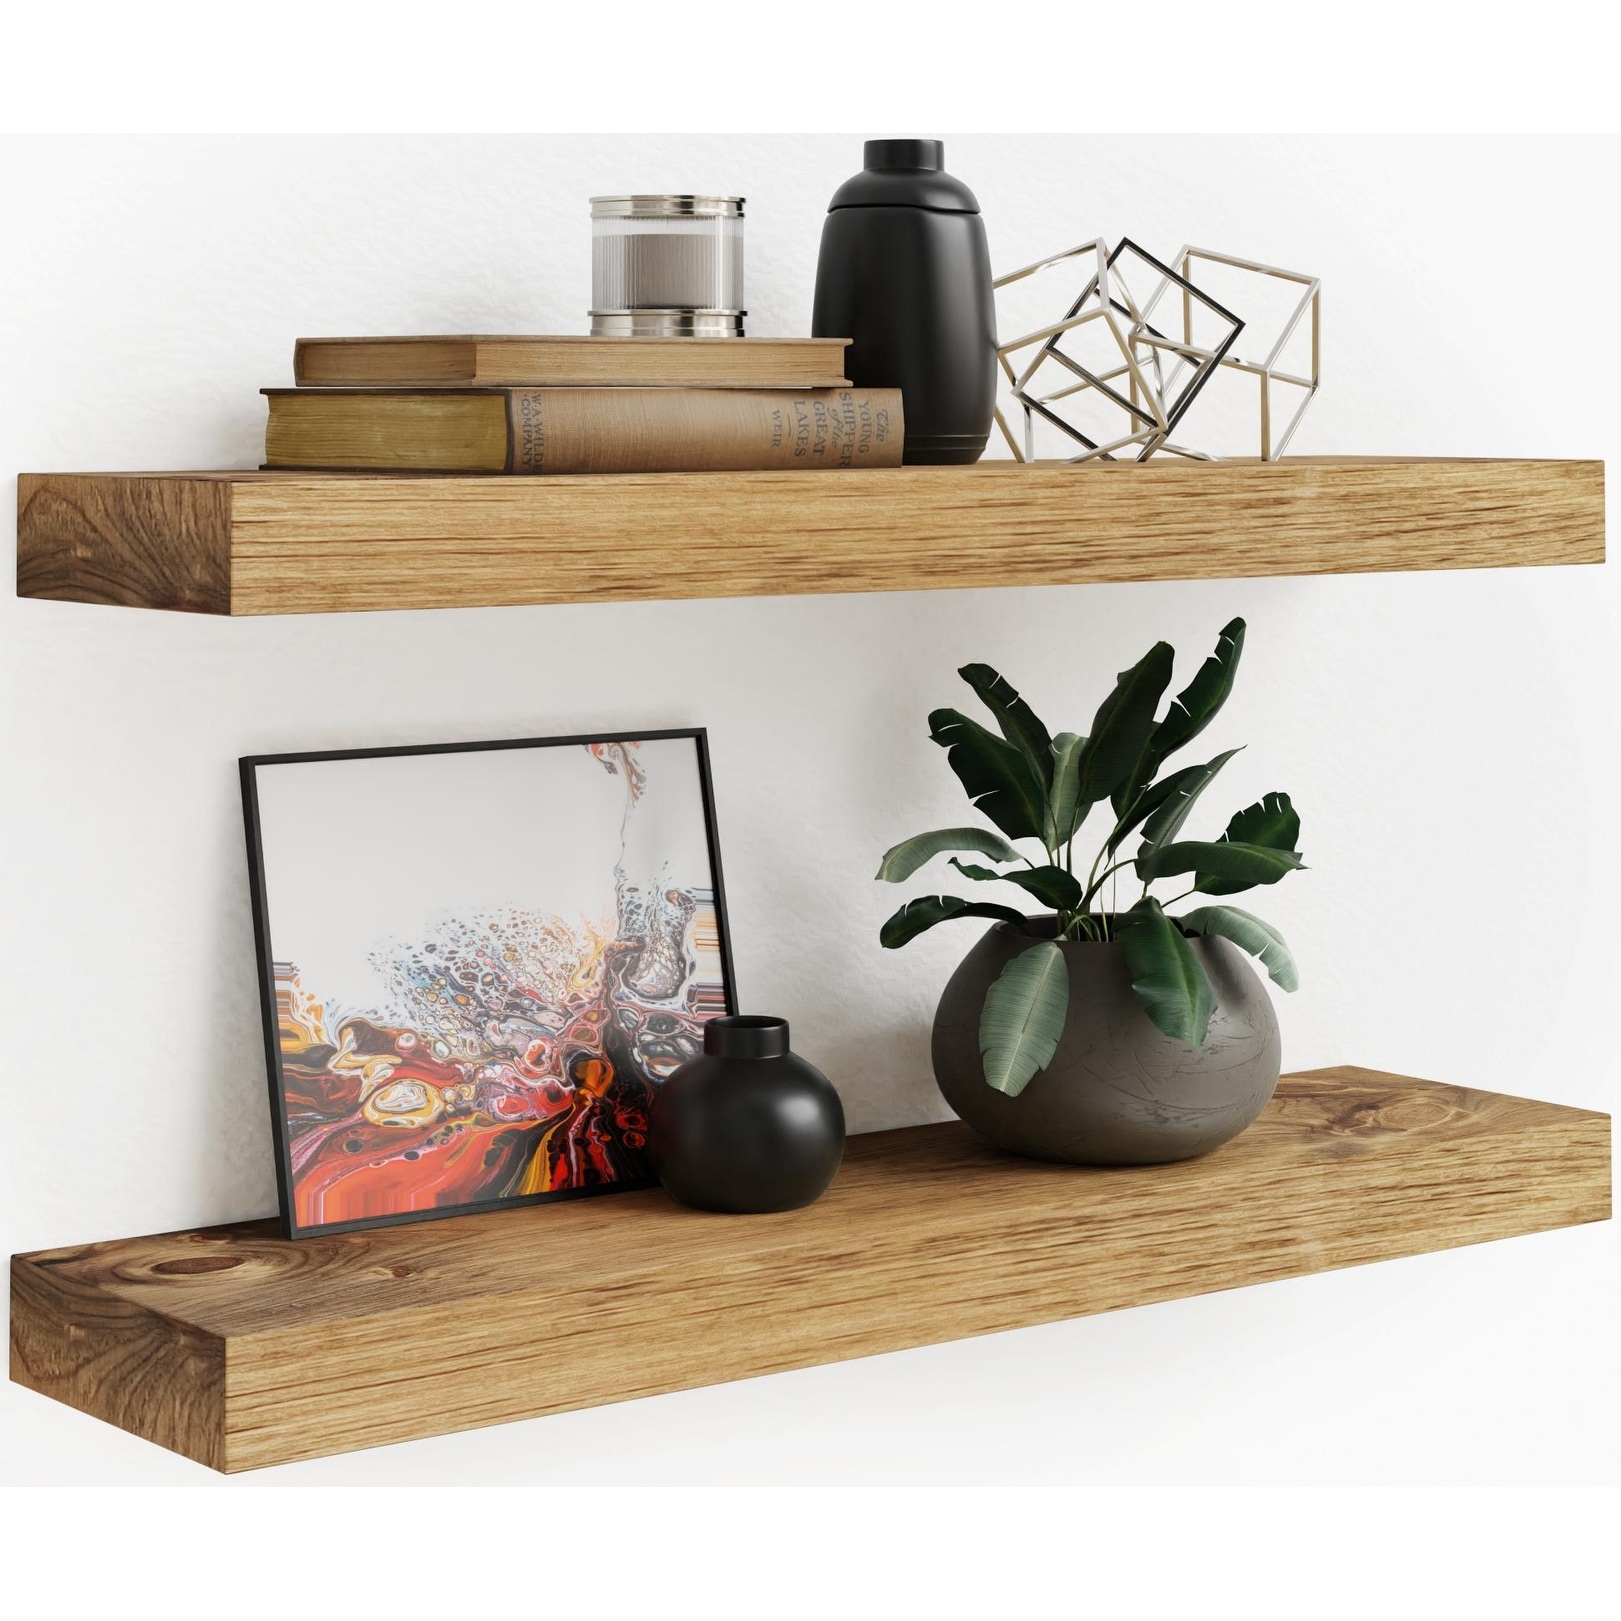 https://ak1.ostkcdn.com/images/products/is/images/direct/b9569f0d11b25106fd8d2a9be5a9d093fb0cee0e/Rustic-Wooden-Floating-Wall-Shelves-%28Set-of-2%29.jpg